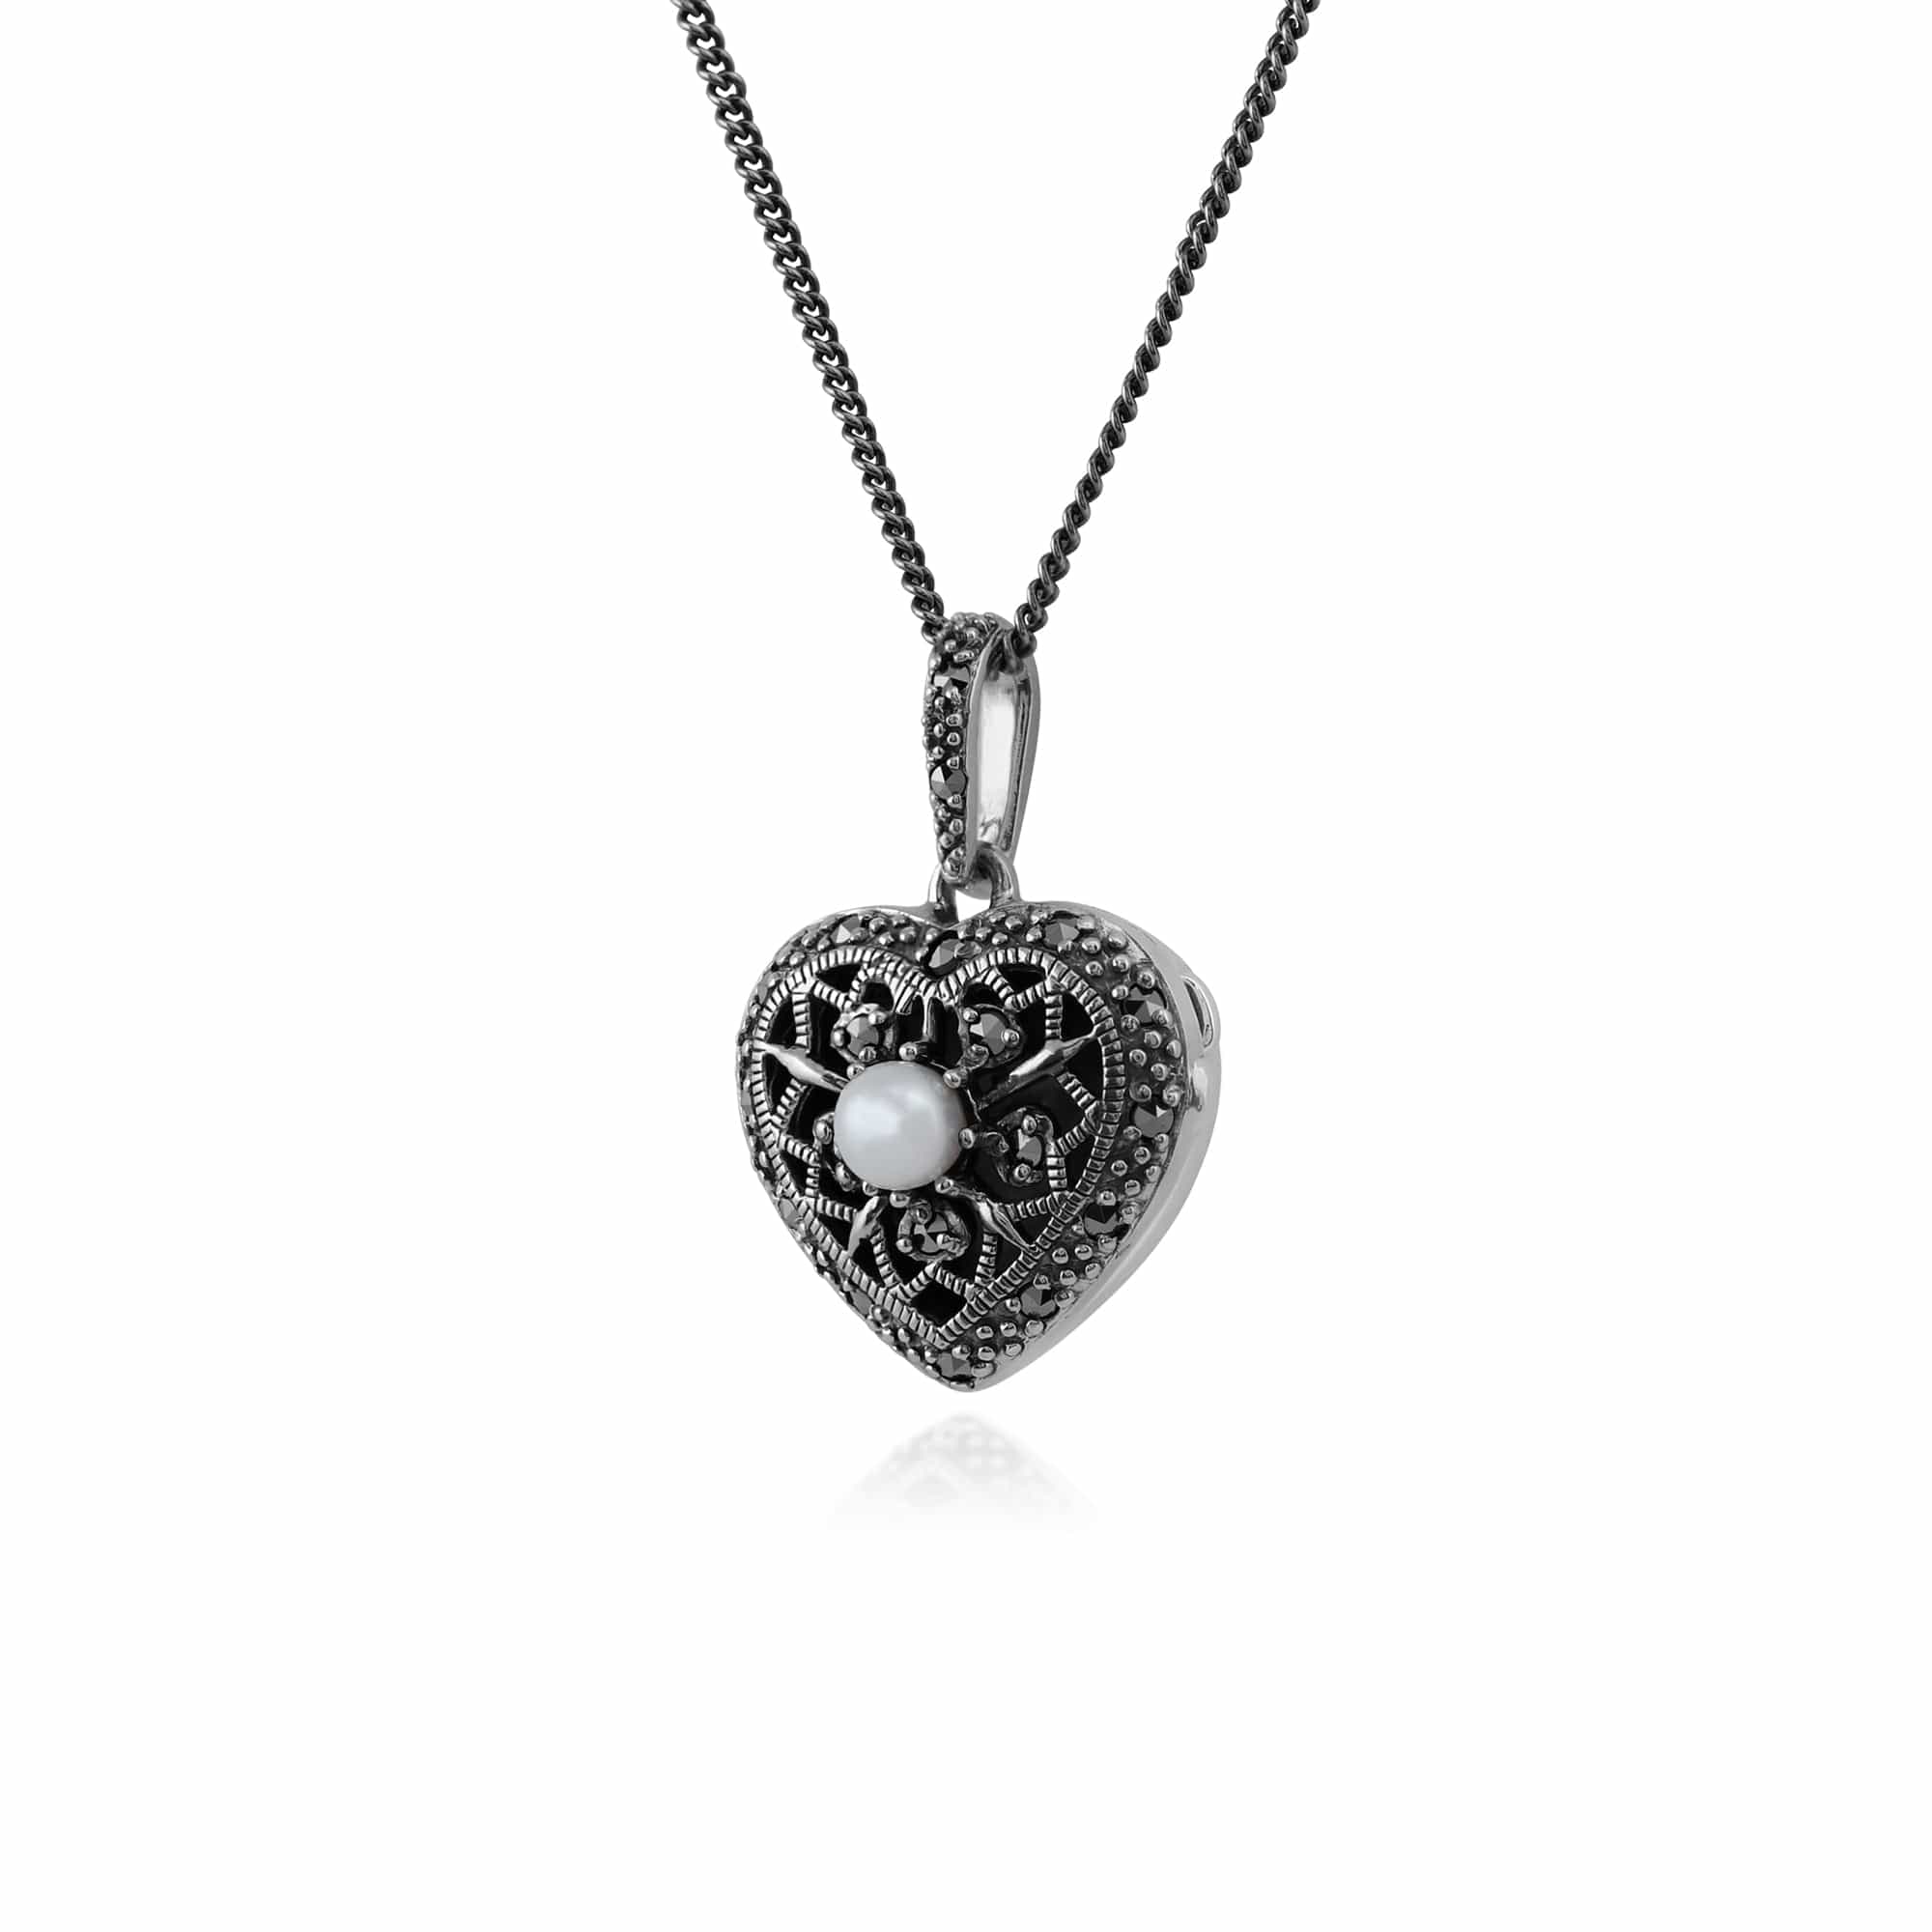 214N688501925 Art Nouveau Style Pearl & Marcasite Heart Necklace in 925 Sterling Silver 4